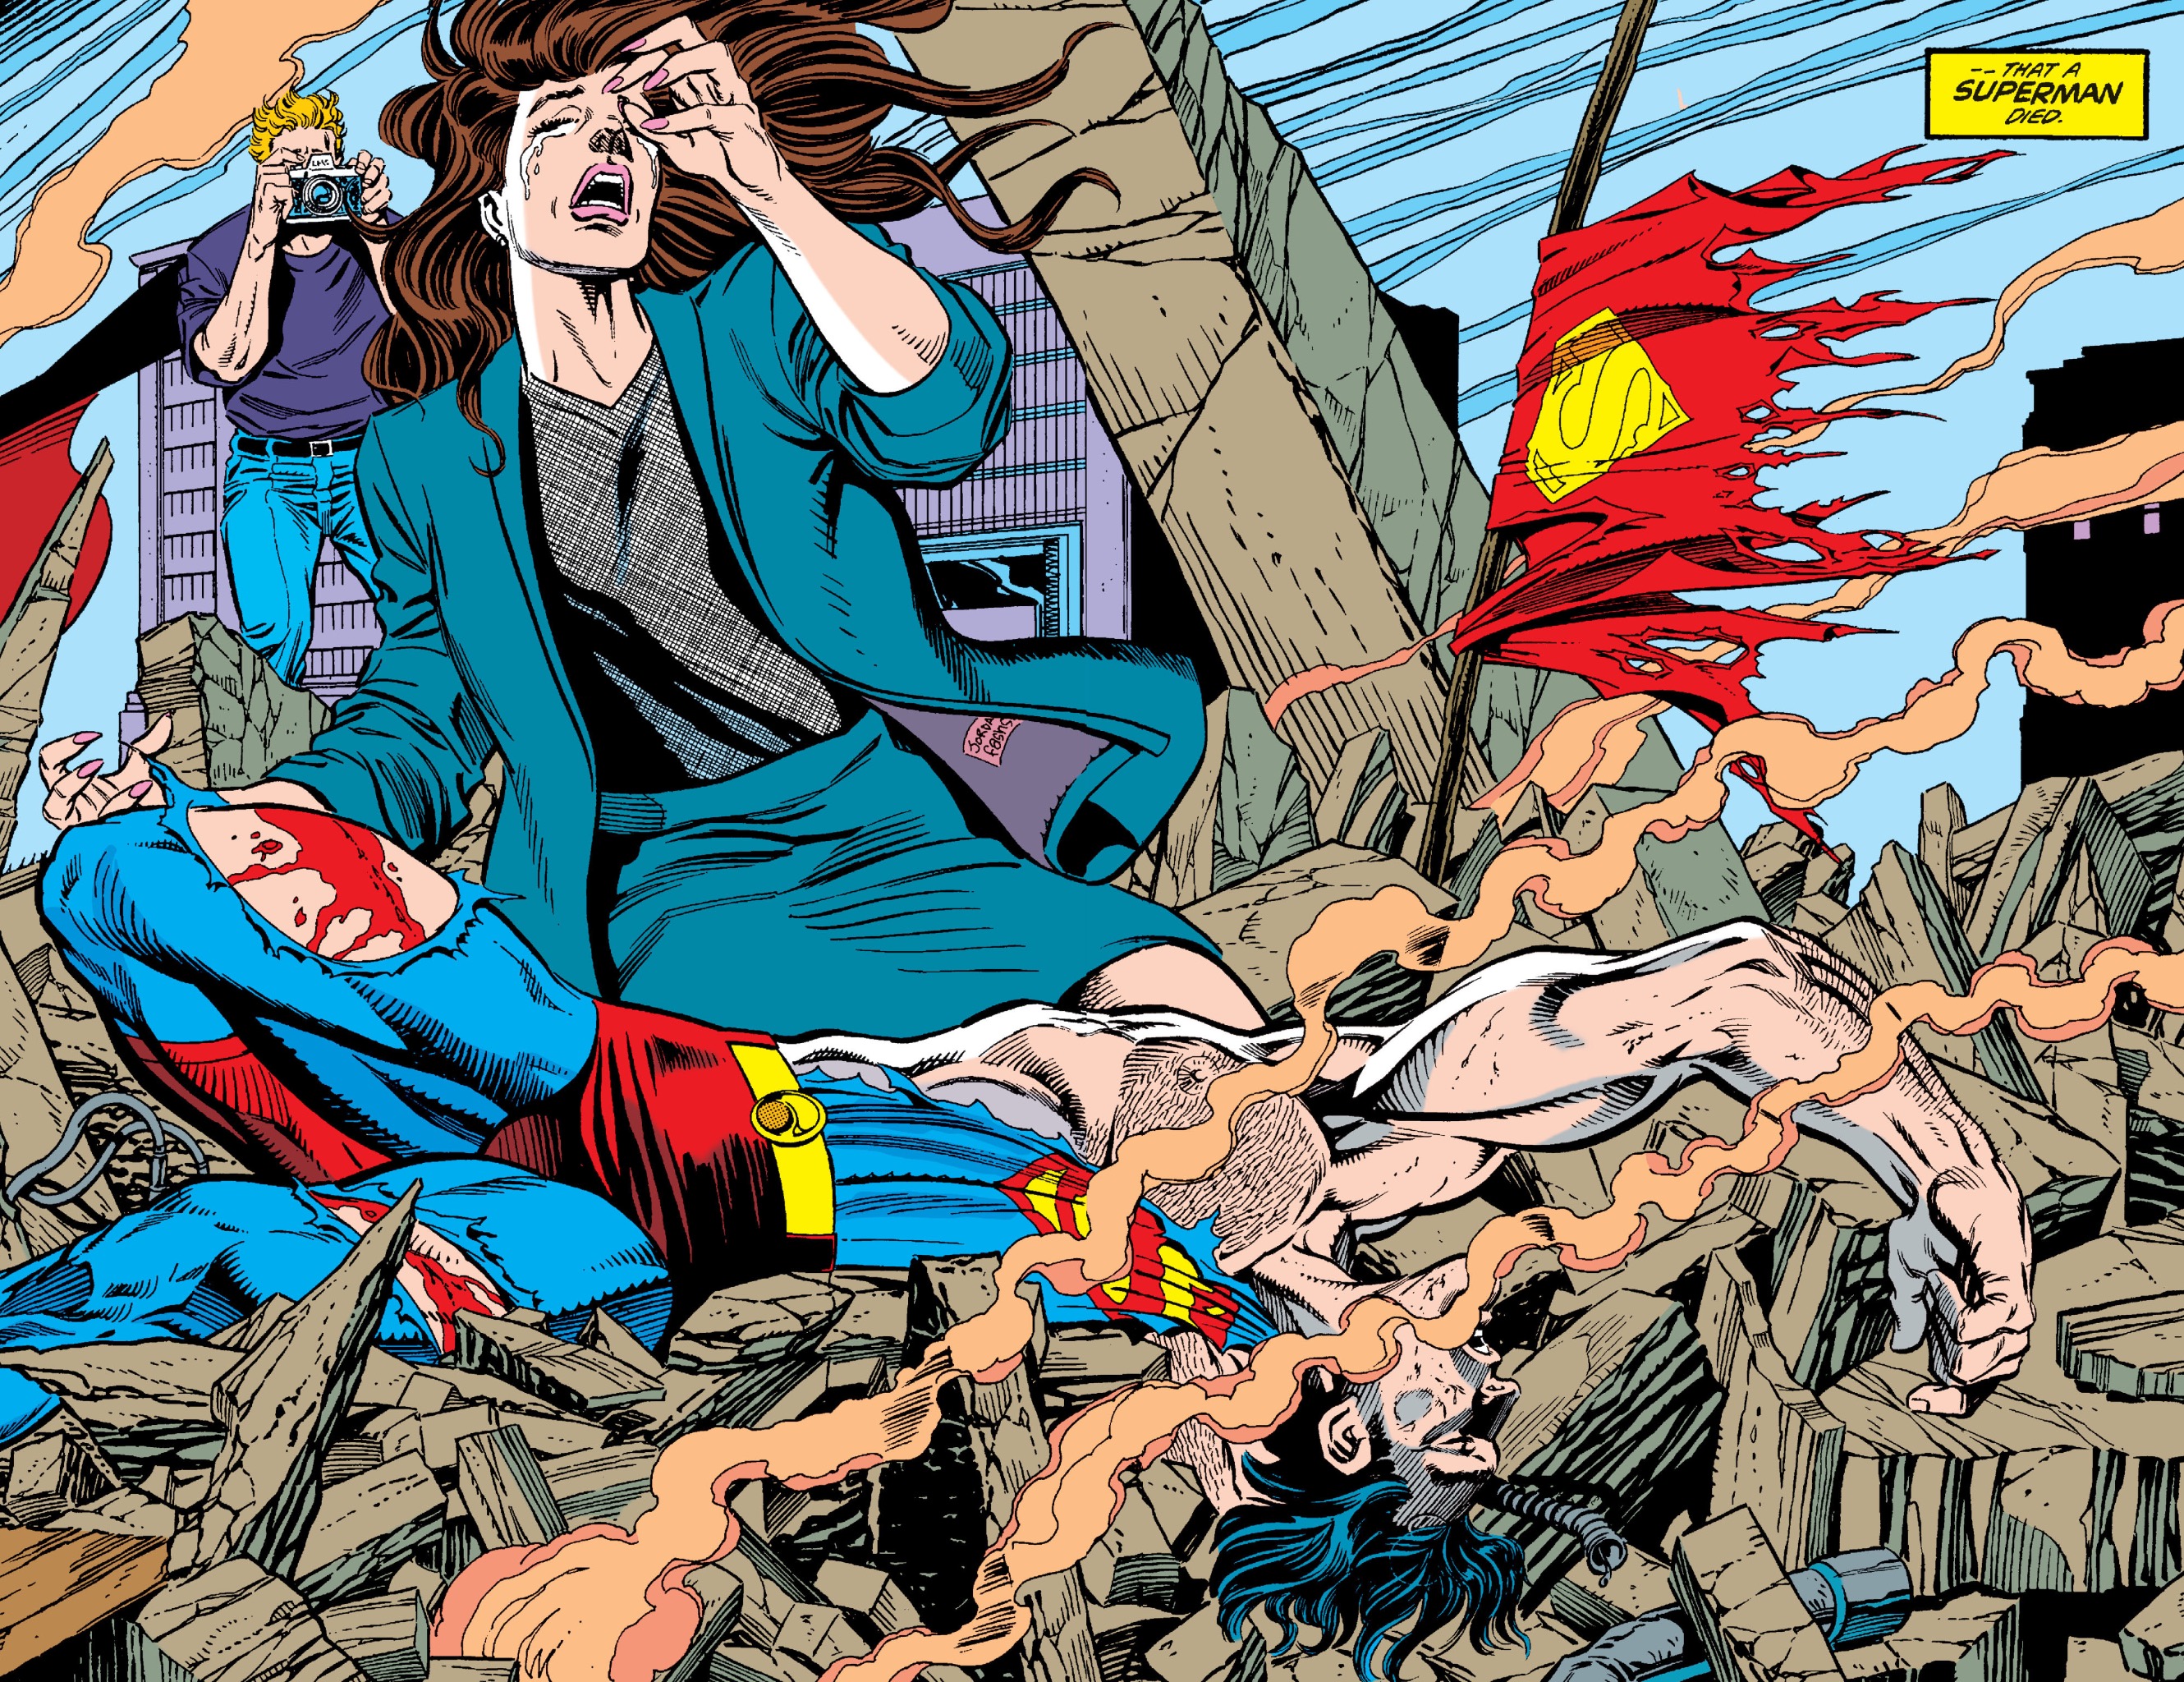 Superman’s body lies in rubble, while Lois Lane and Jimmy Olsen mourn and his tattered cape flutters in the smoke, on the final page of Superman #75, DC Comics (1992).